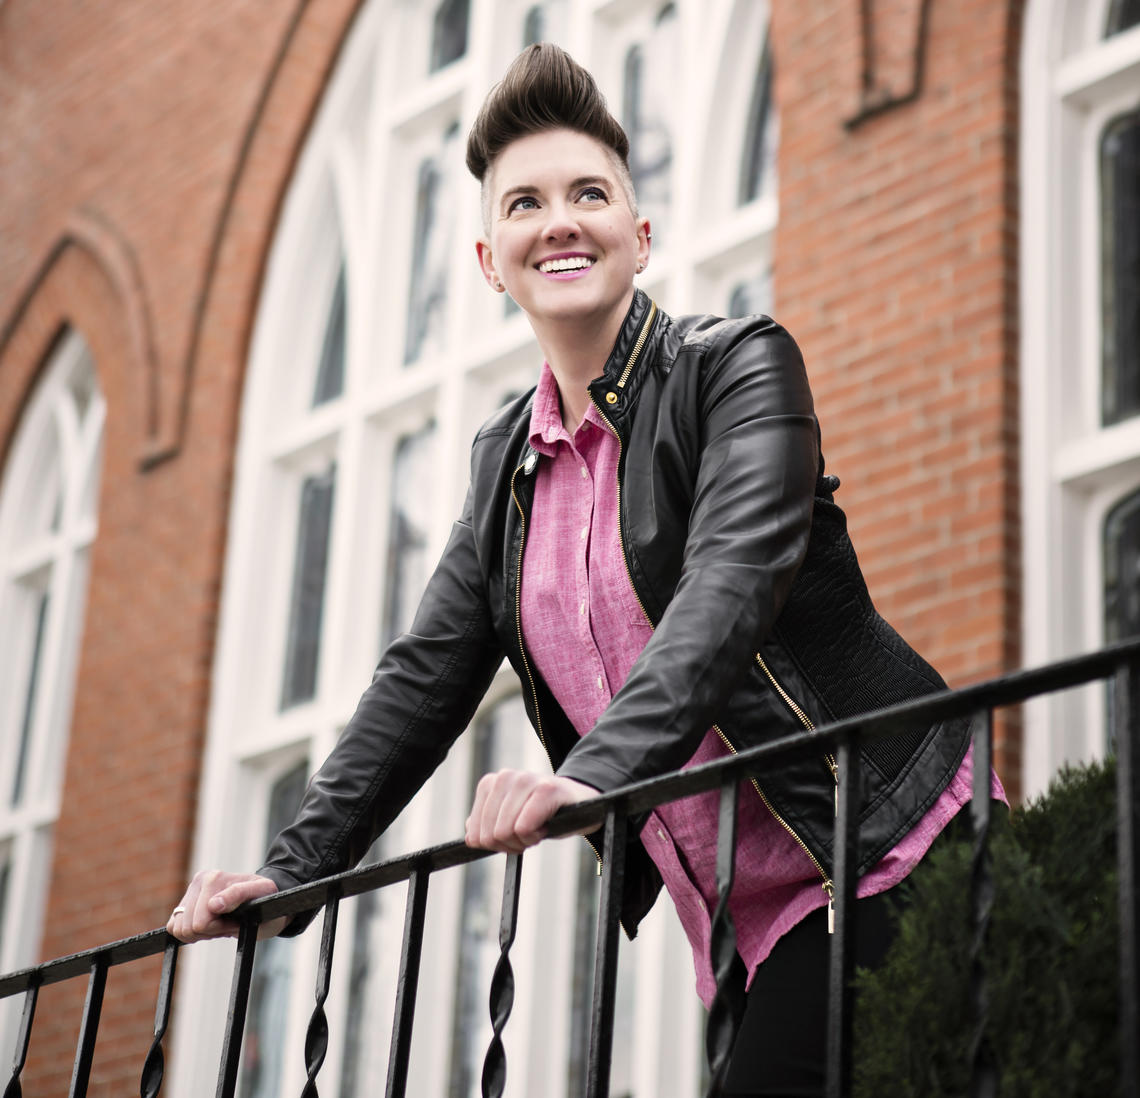 Woman with short dark hair smiles in front of a church